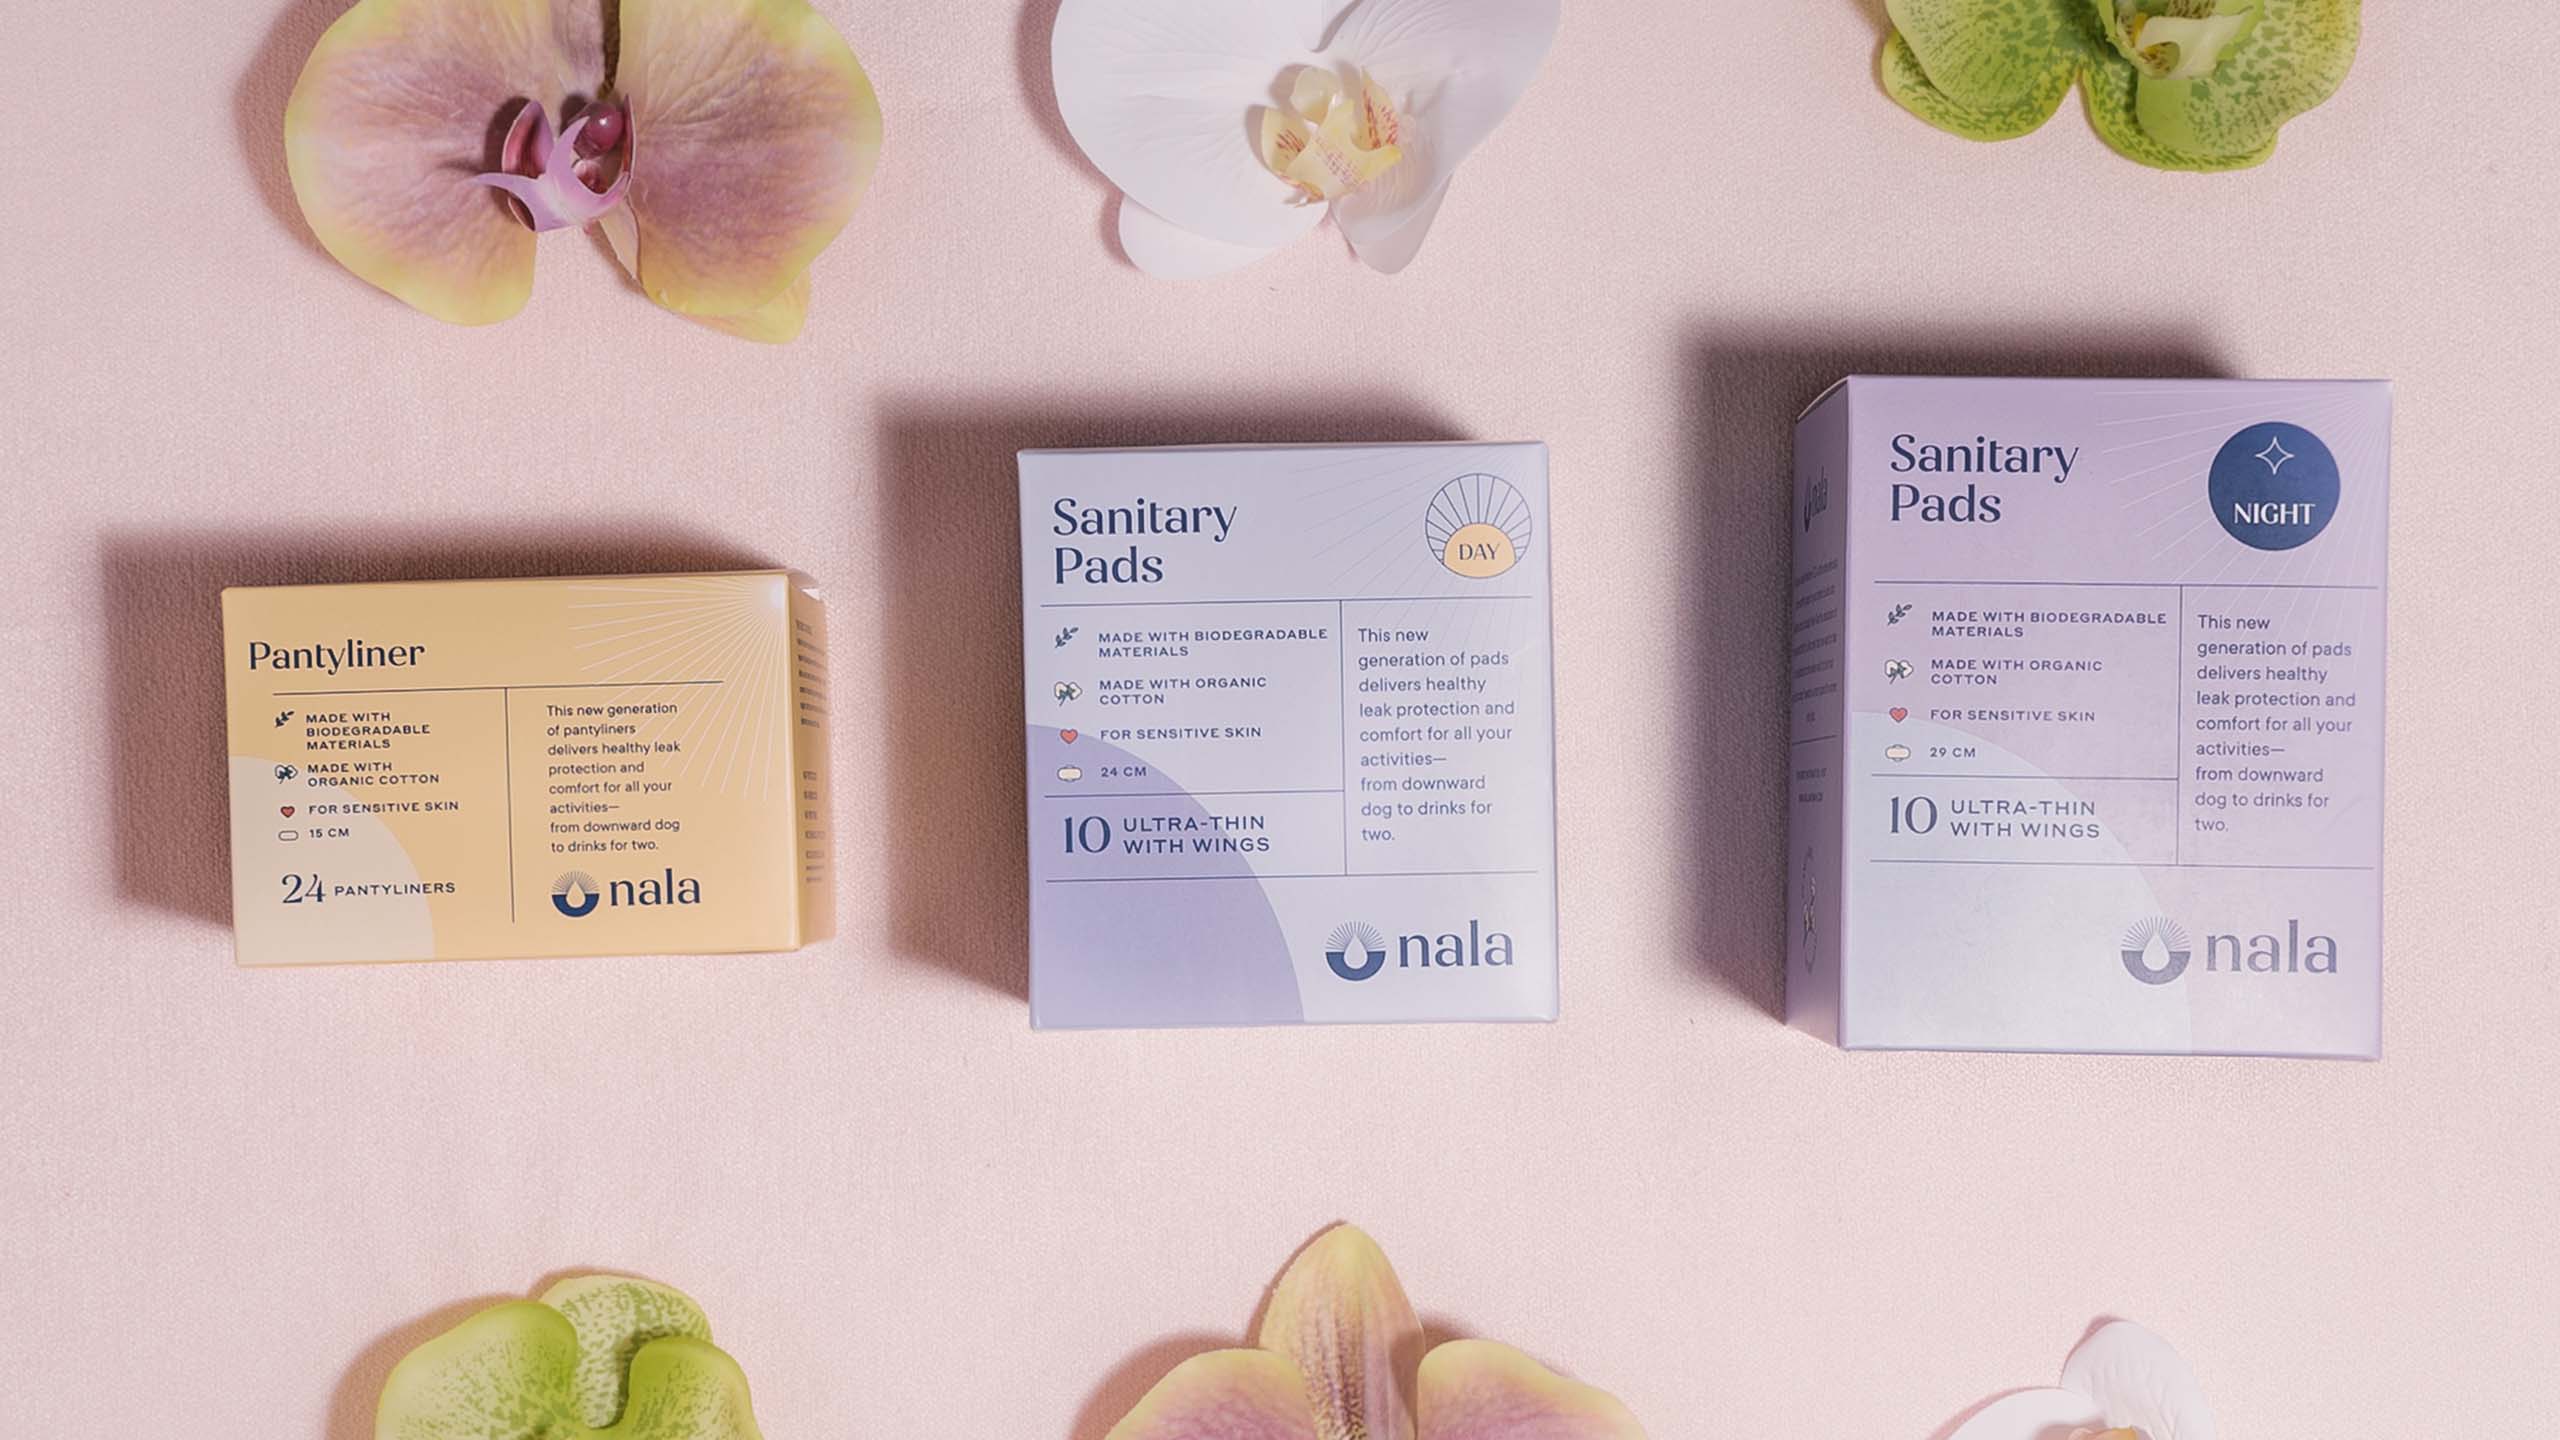 A flatlay of sanitary products and packaging designed for femtech brand Nala